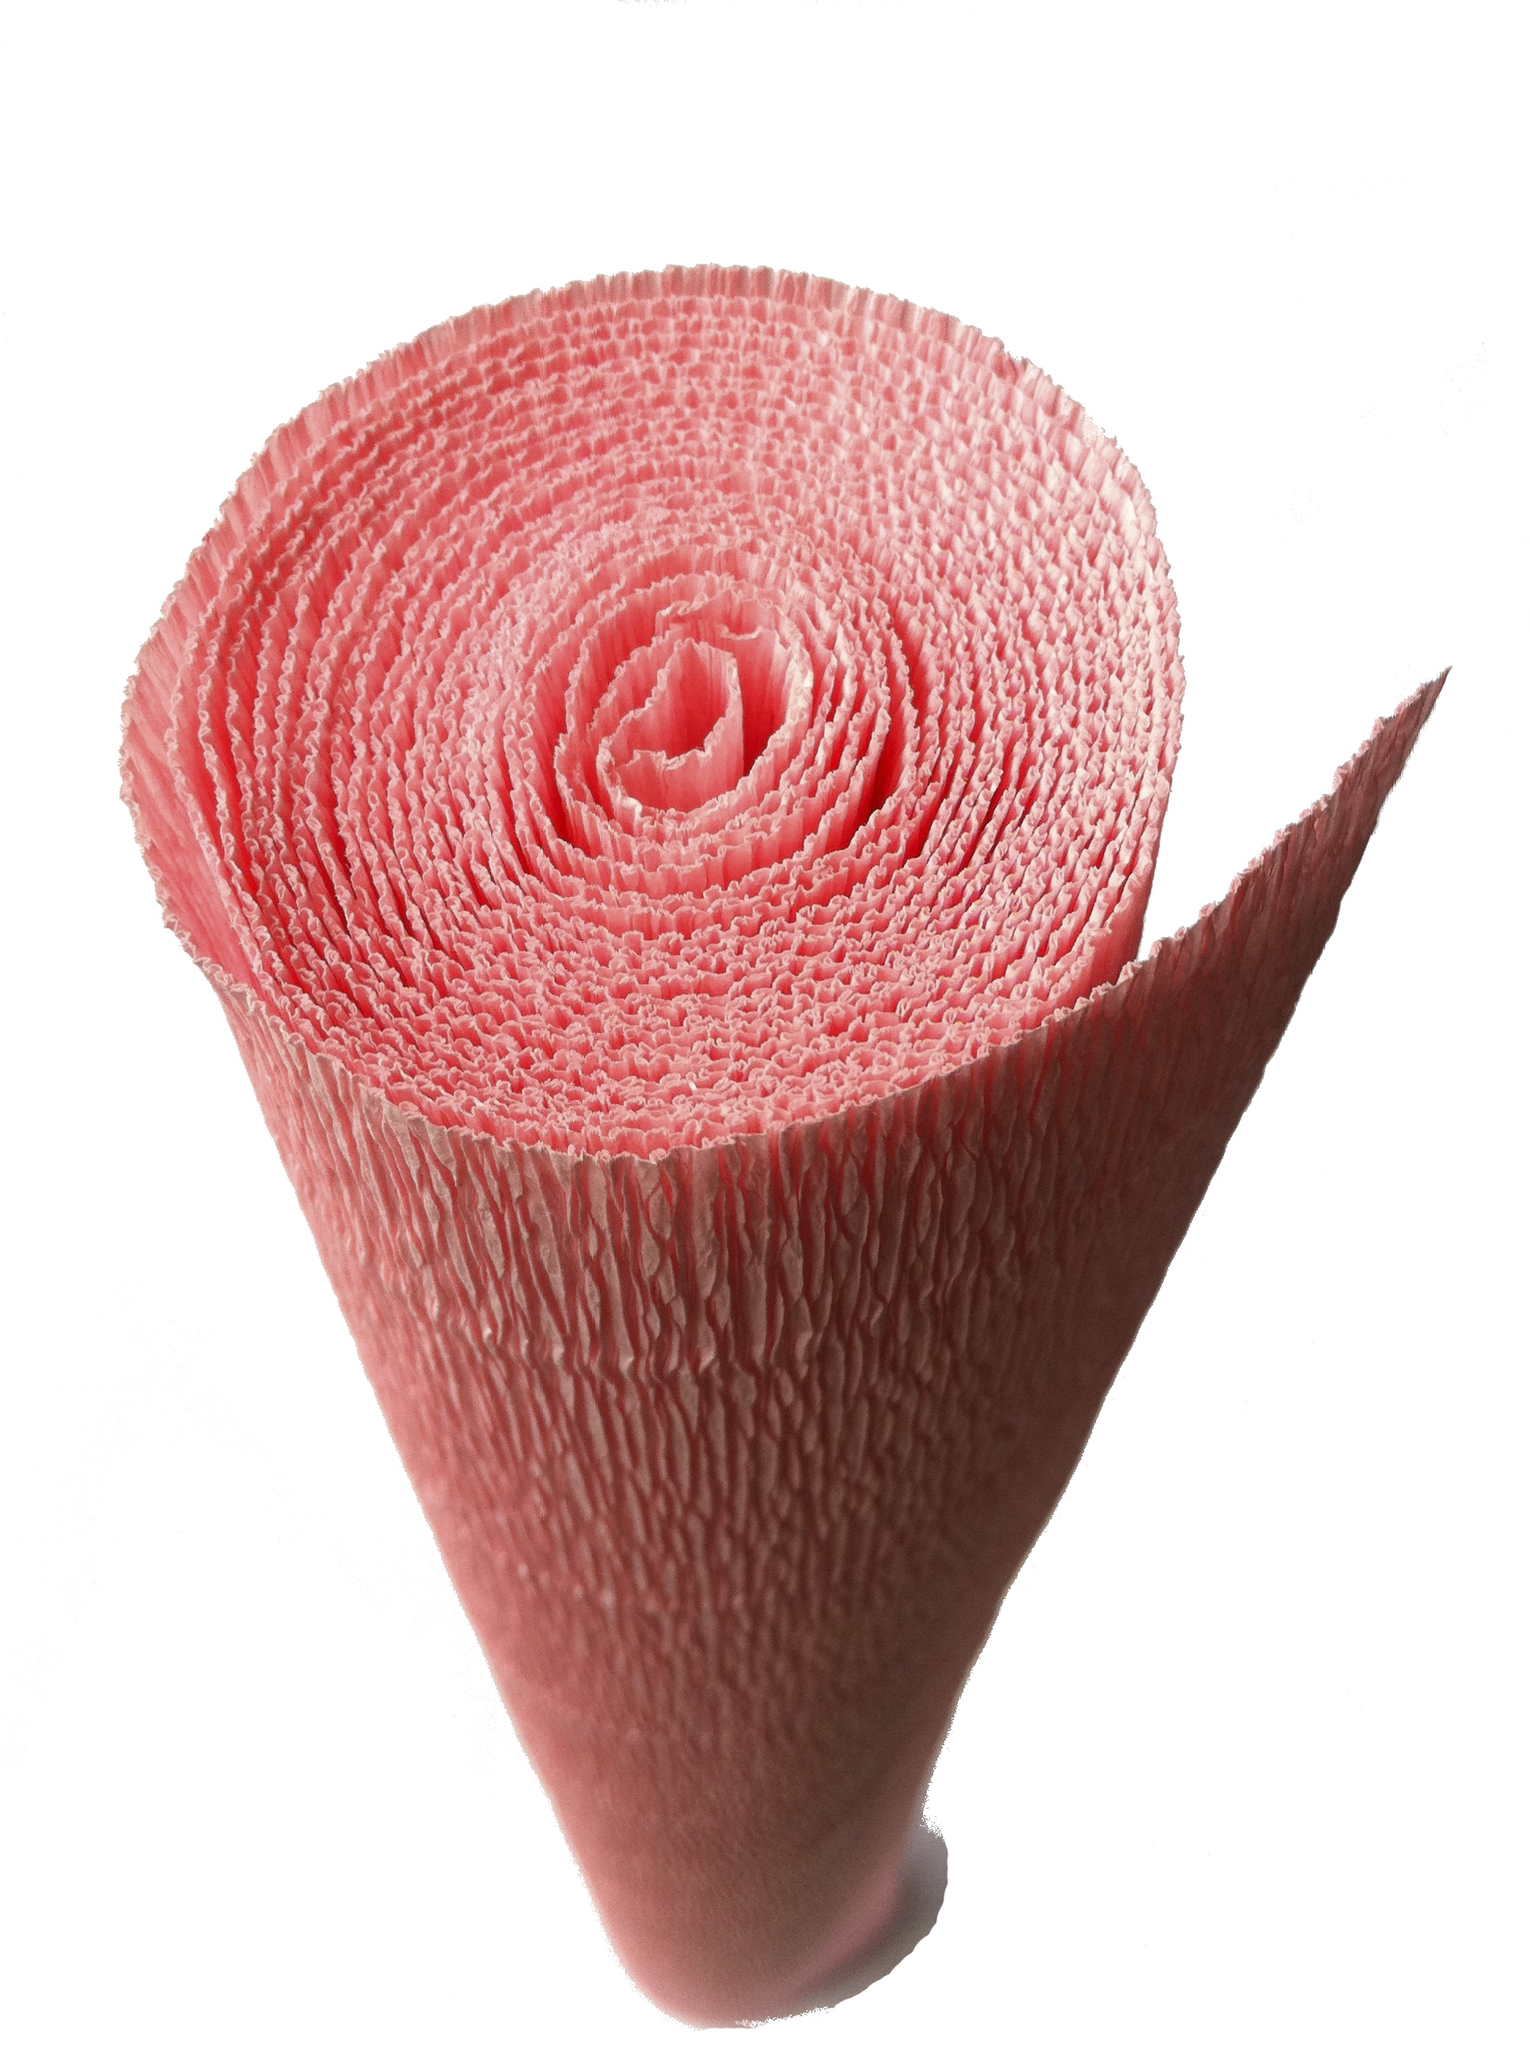  Crepe Paper Folds Crepe Paper Roll Pink Italian Crepe Paper  Sheets Gift Wrapping Paper for Floral Artwork DIY Flower Making Wedding  Decor 2.5x0.5m 180g Heavy Crepe Paper : Arts, Crafts 